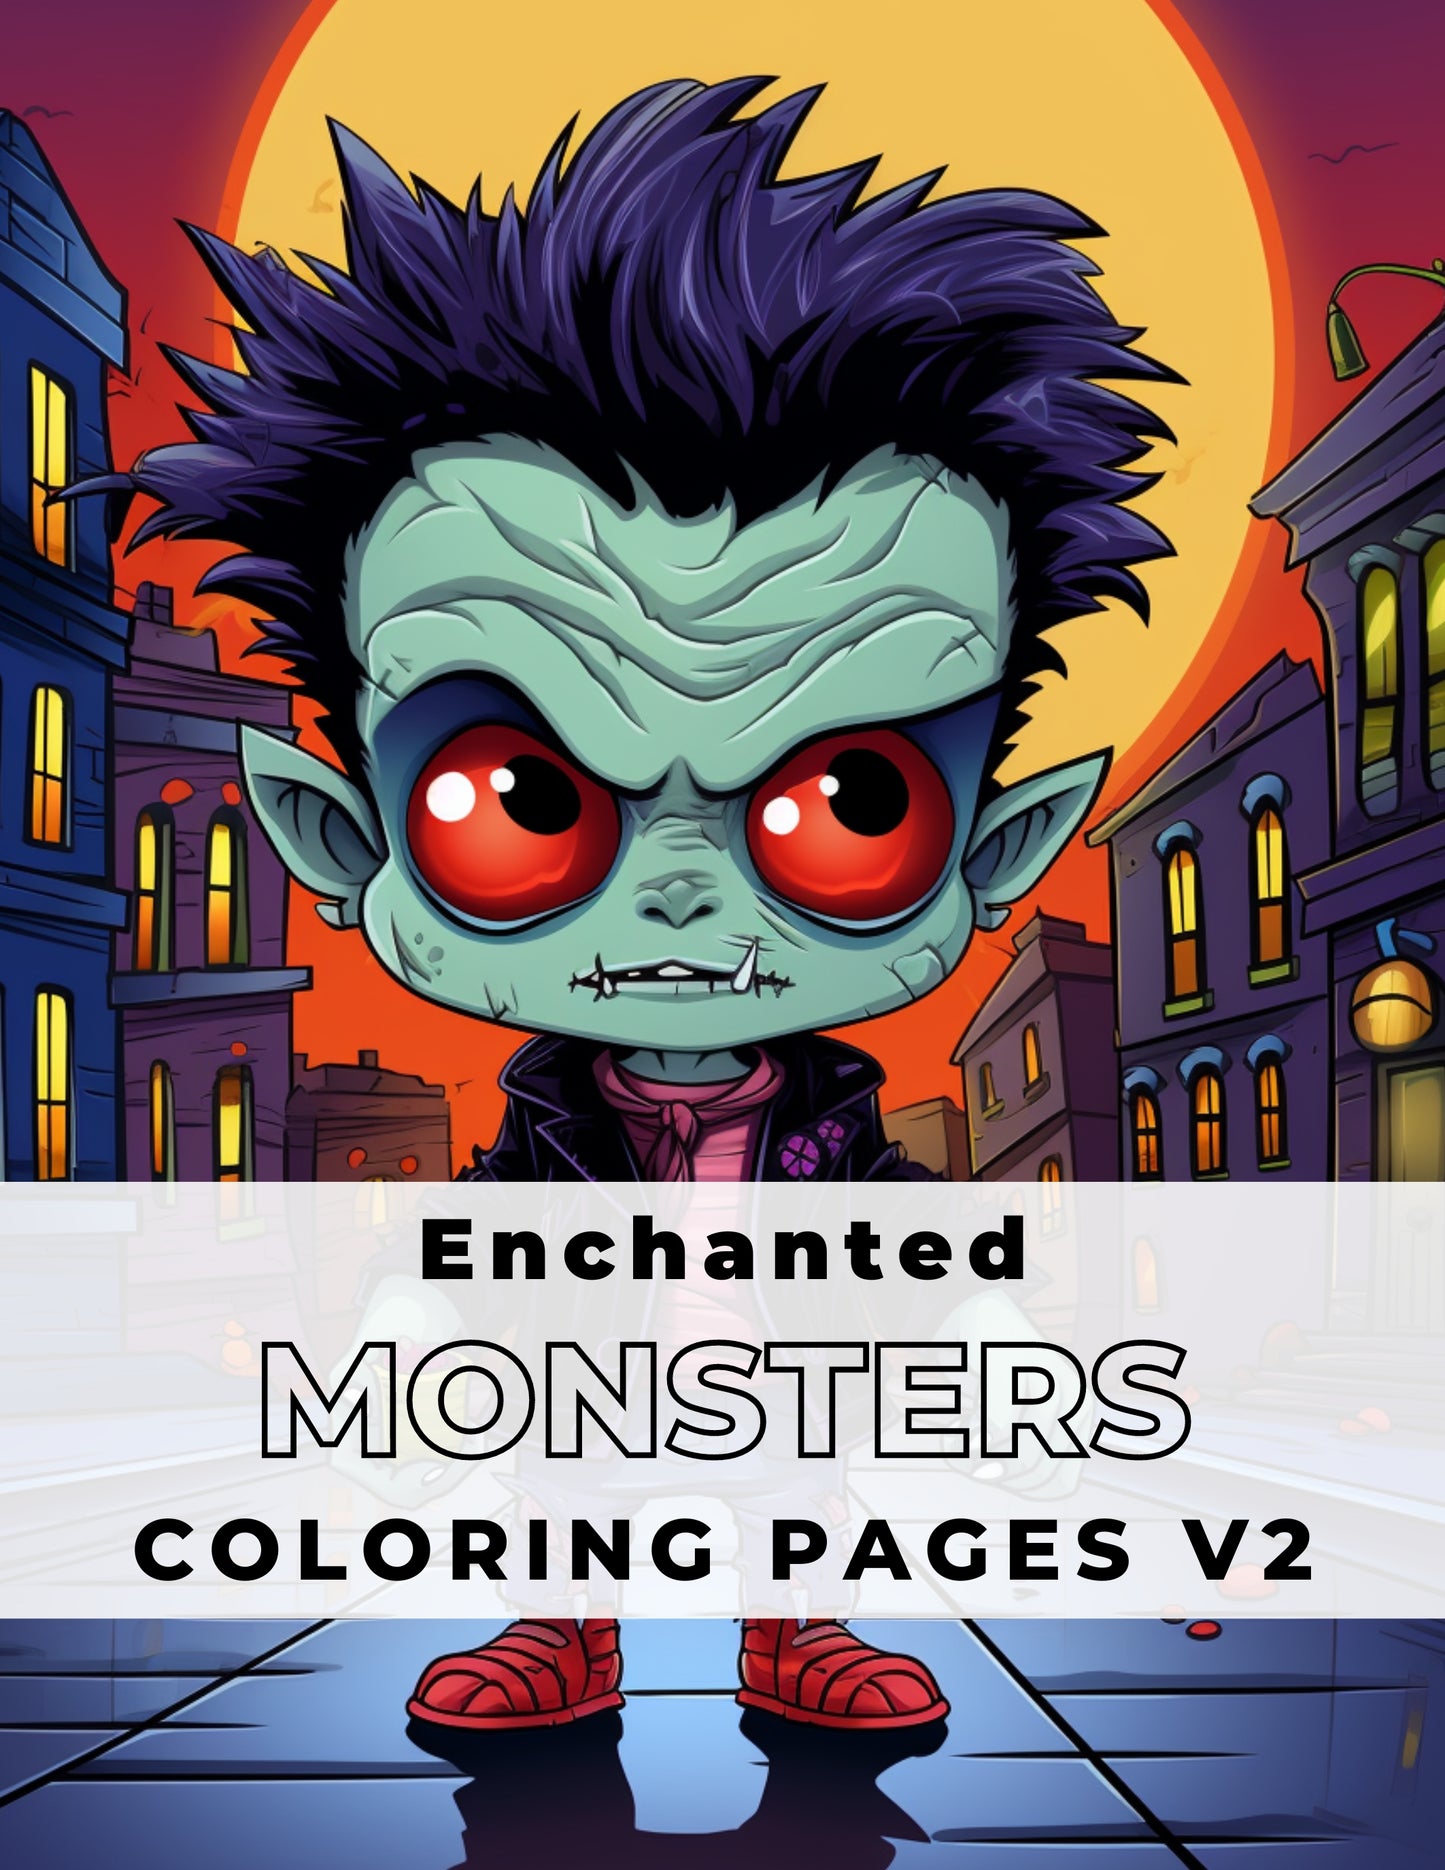 MRR - 16 Mesmerizing Coloring Books, 222 Pages Full Master Resell Rights - Limited Time!